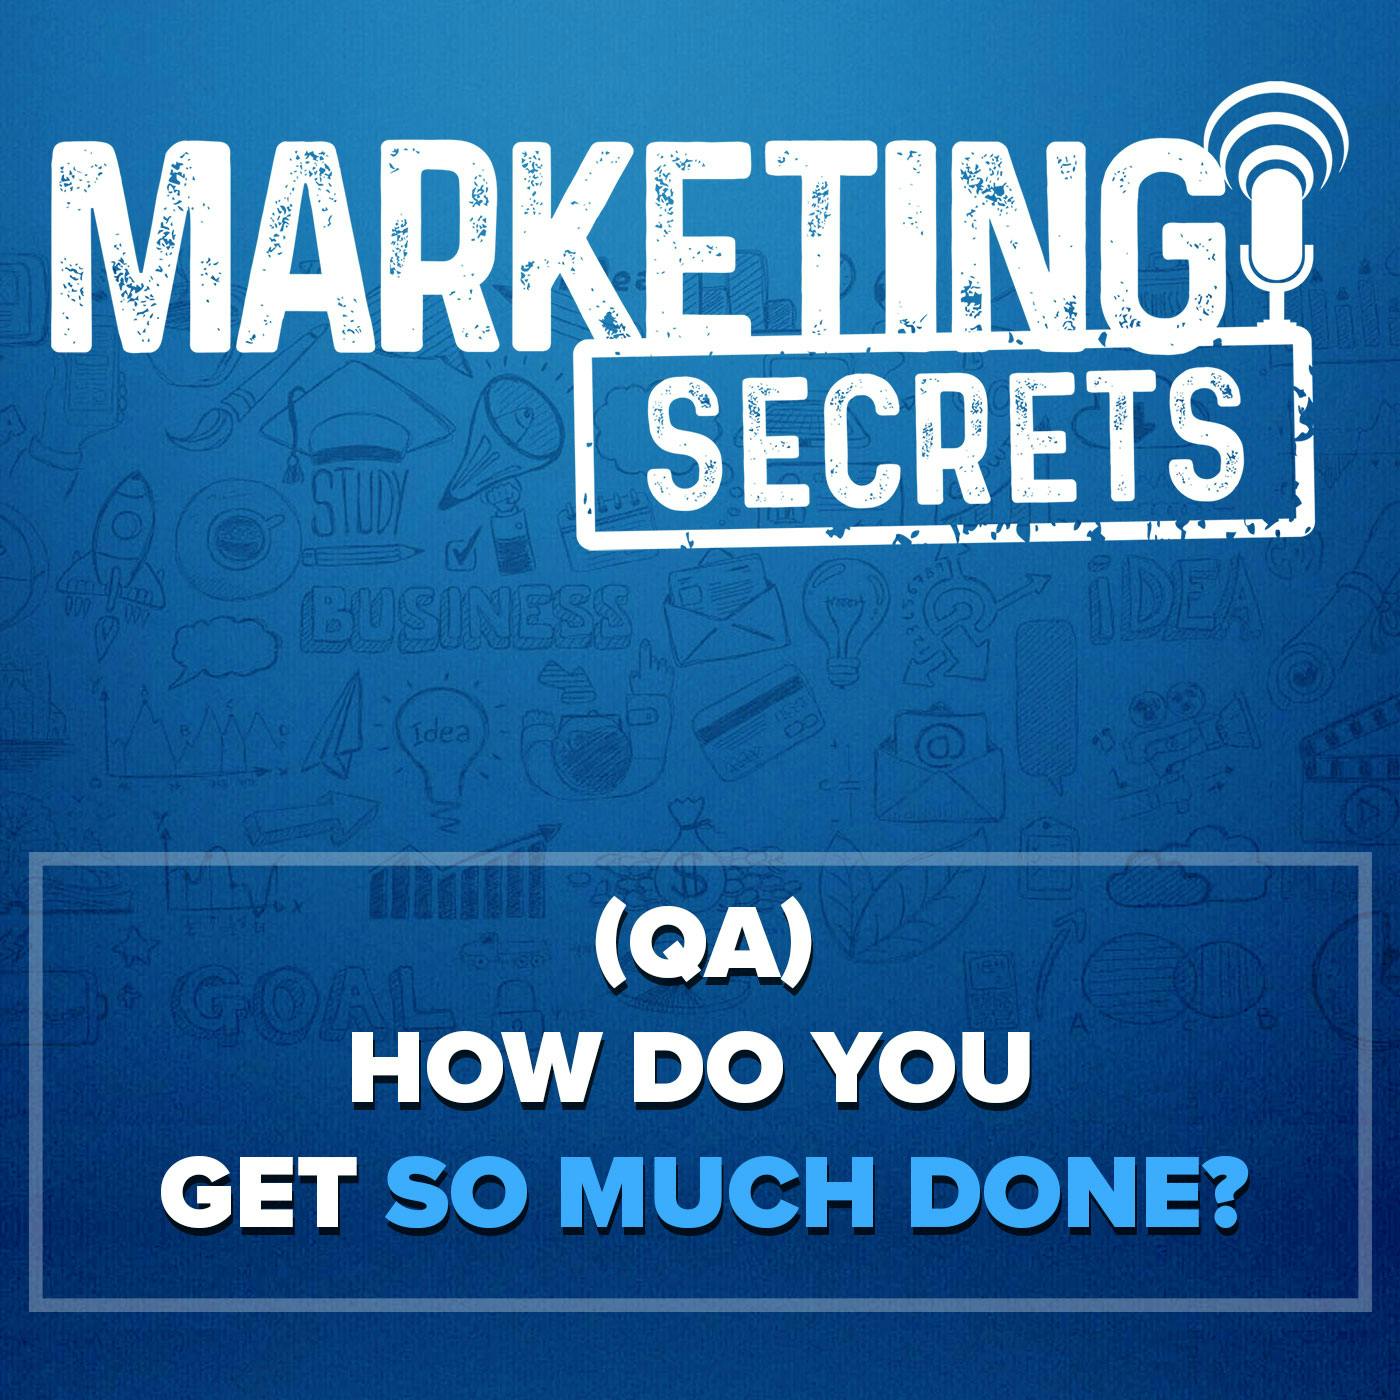 (Q&A) How Do You Get So Much Done?